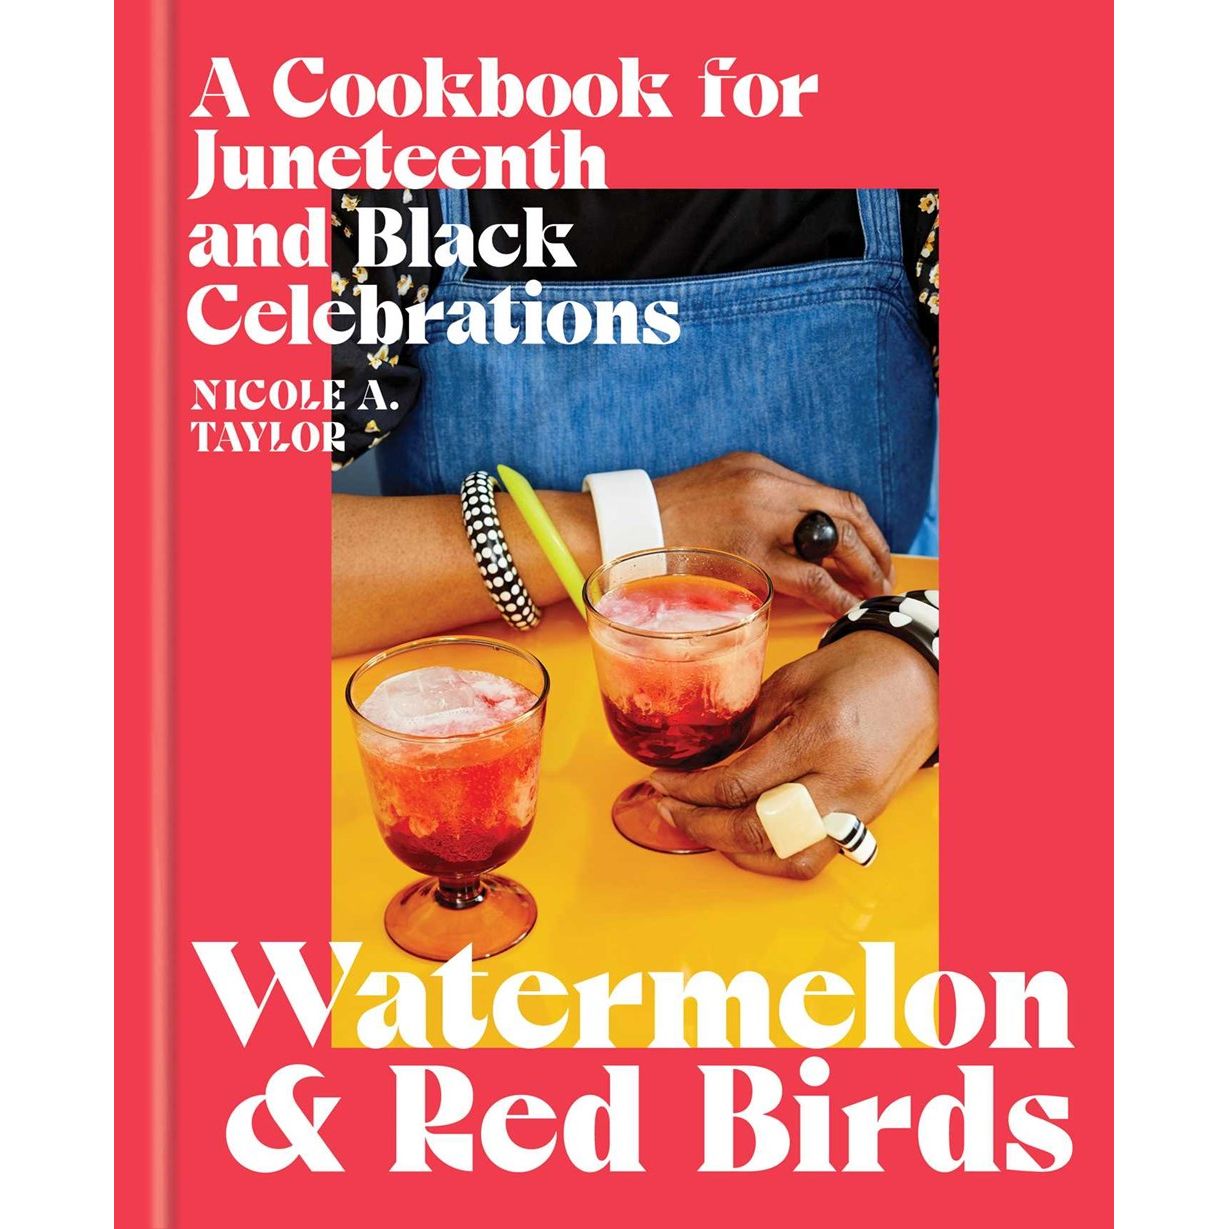 Watermelon and Red Birds: A Cookbook for Juneteenth and Black Celebrations (Nicole A. Taylor)